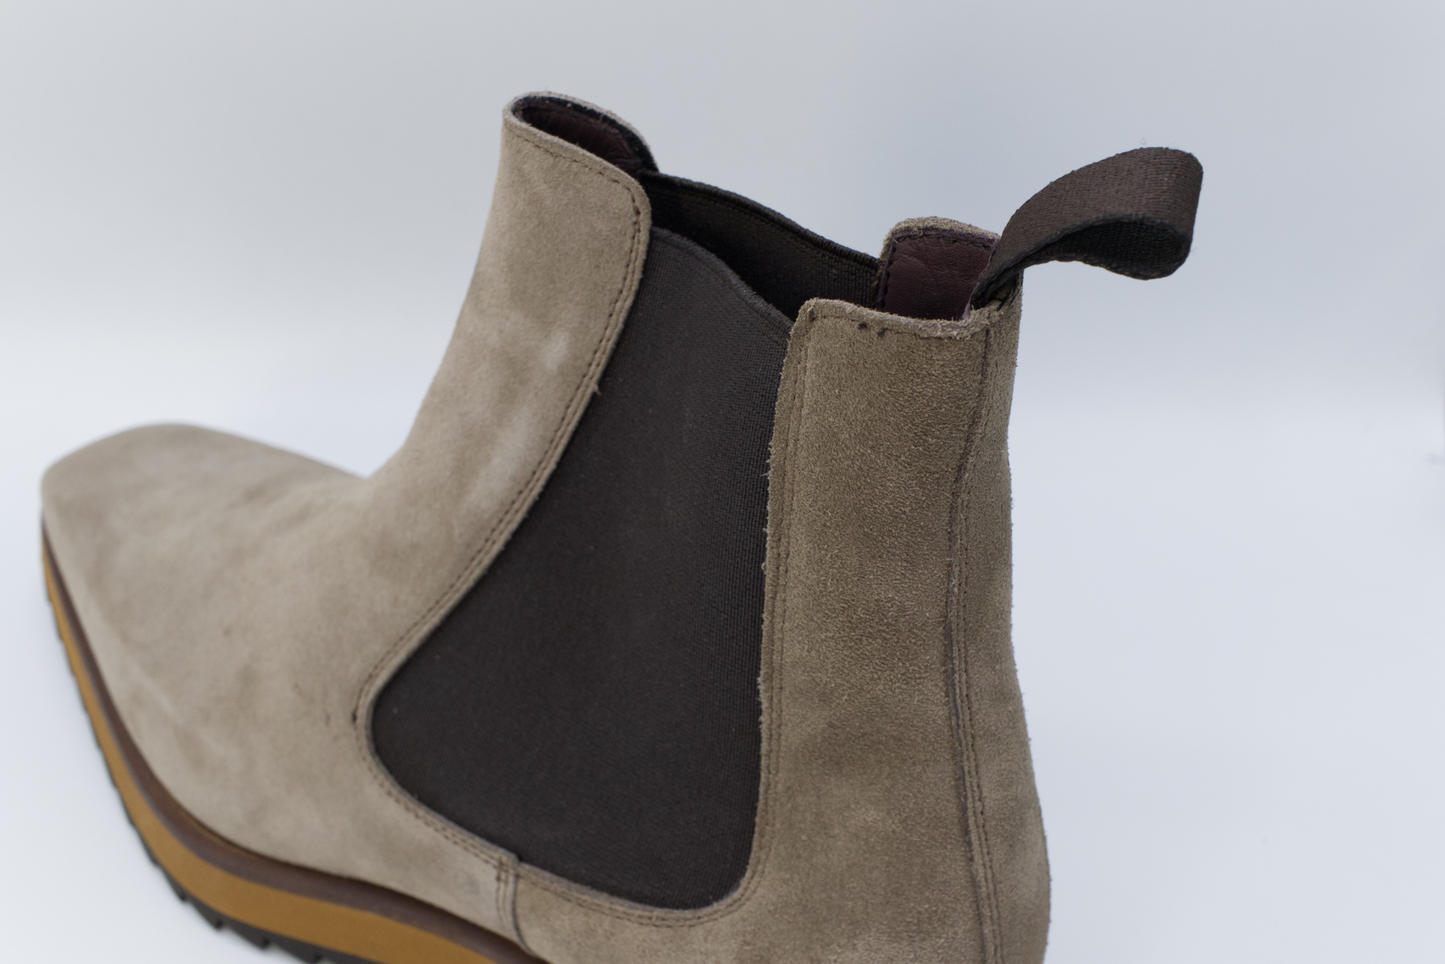 Shop Handmade Italian Men's Suede Chelsea Boot in Dove Grey or browse our range of hand-made Italian sneakers for men in leather or suede. We deliver to the USA and Canada & offer multiple payment plans as well as accept multiple safe & secure payment methods. \With exceptional quality and comfort, our boots are perfect for any occasion.  Duedi03